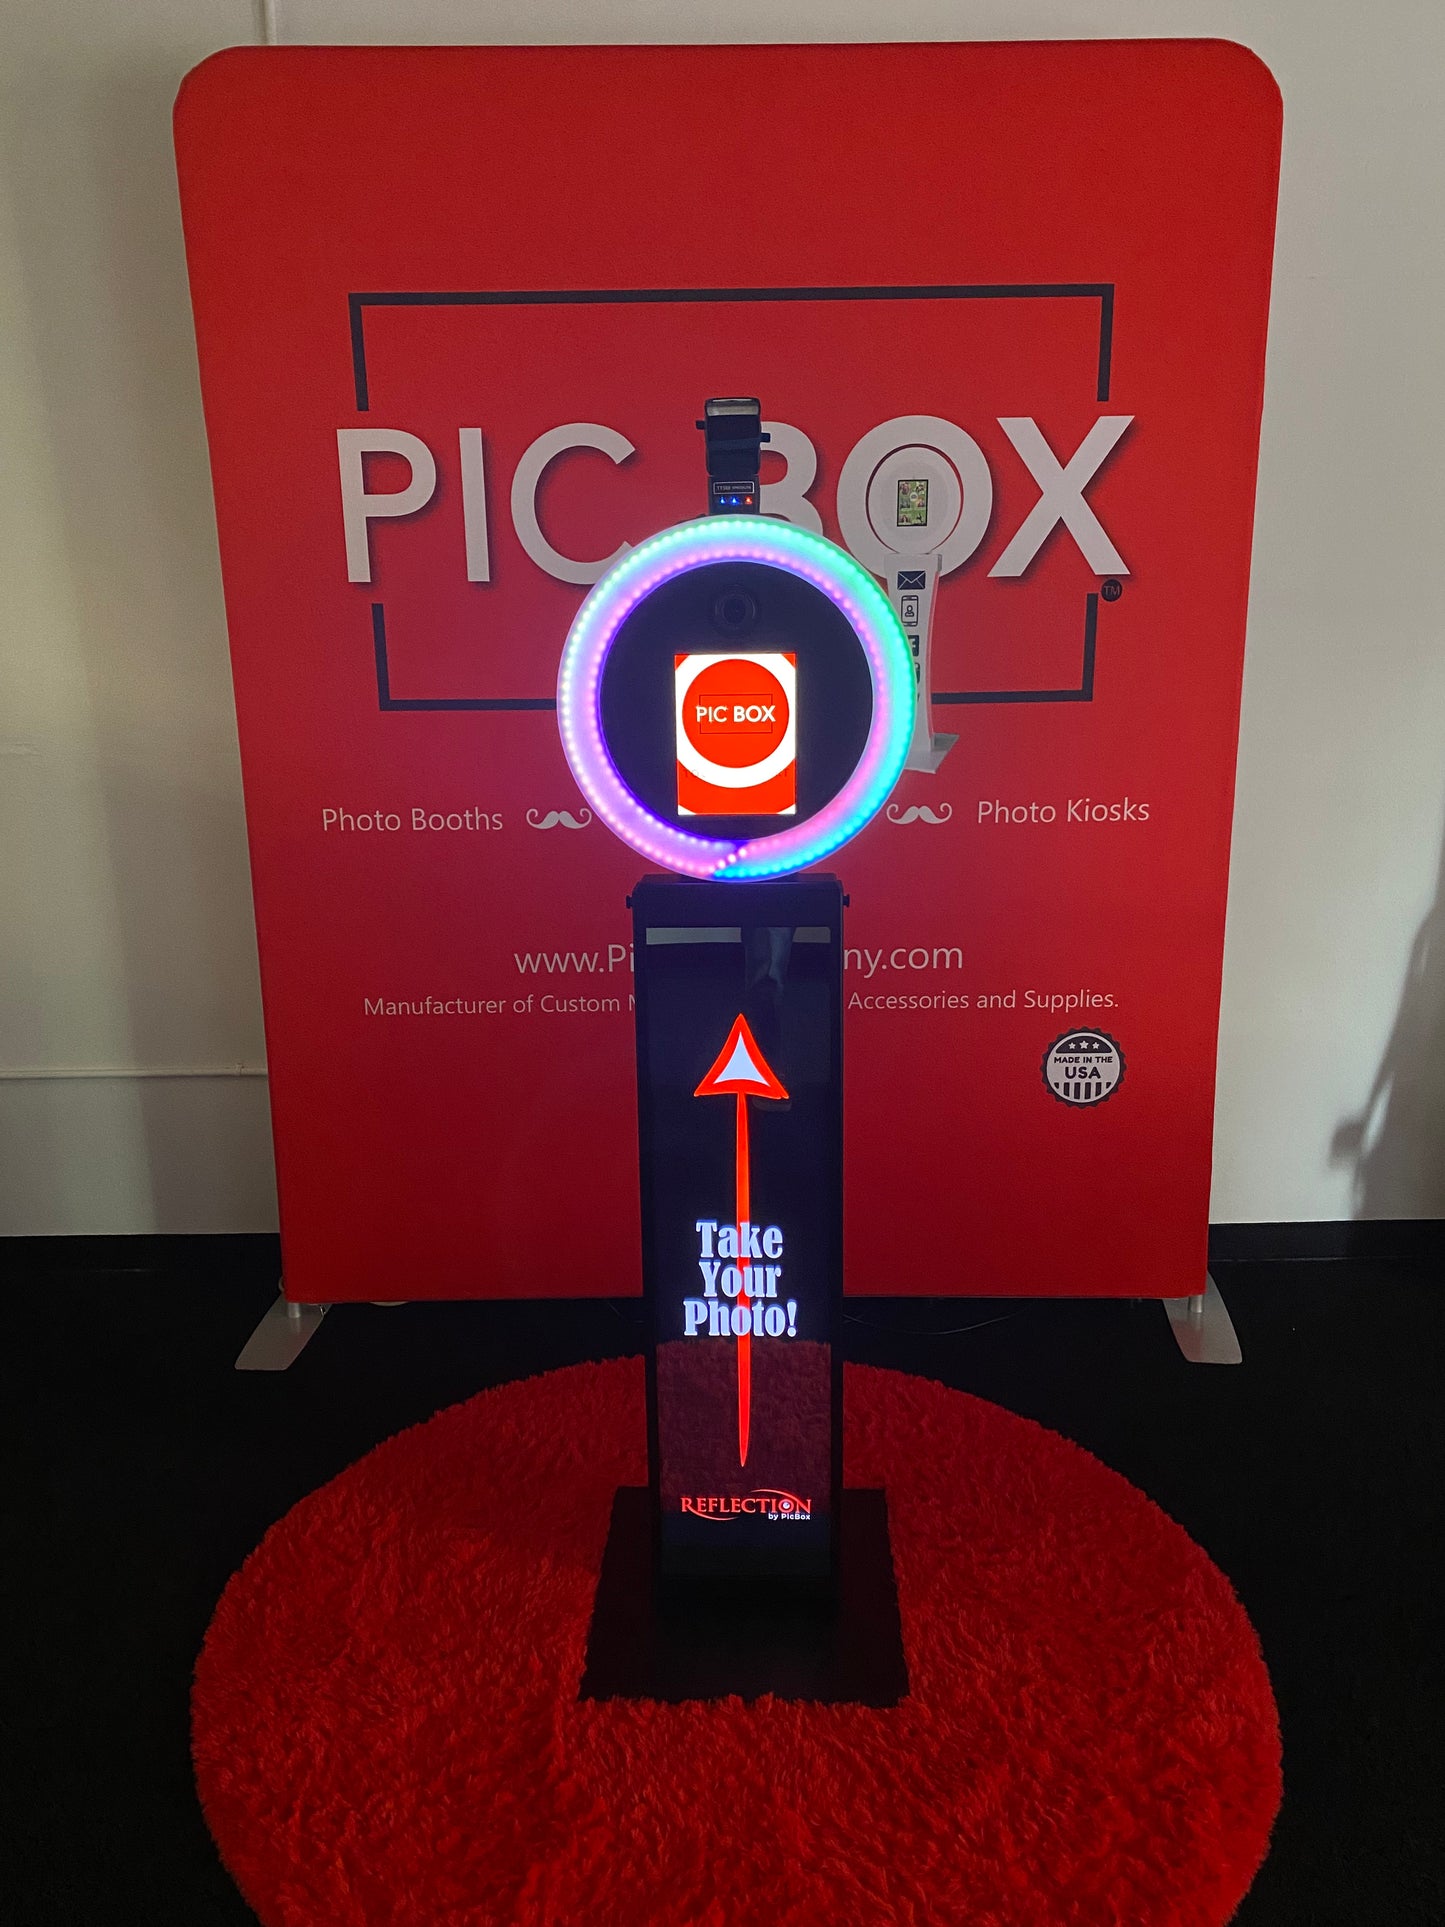 PicBox Reflection - PicBox Company